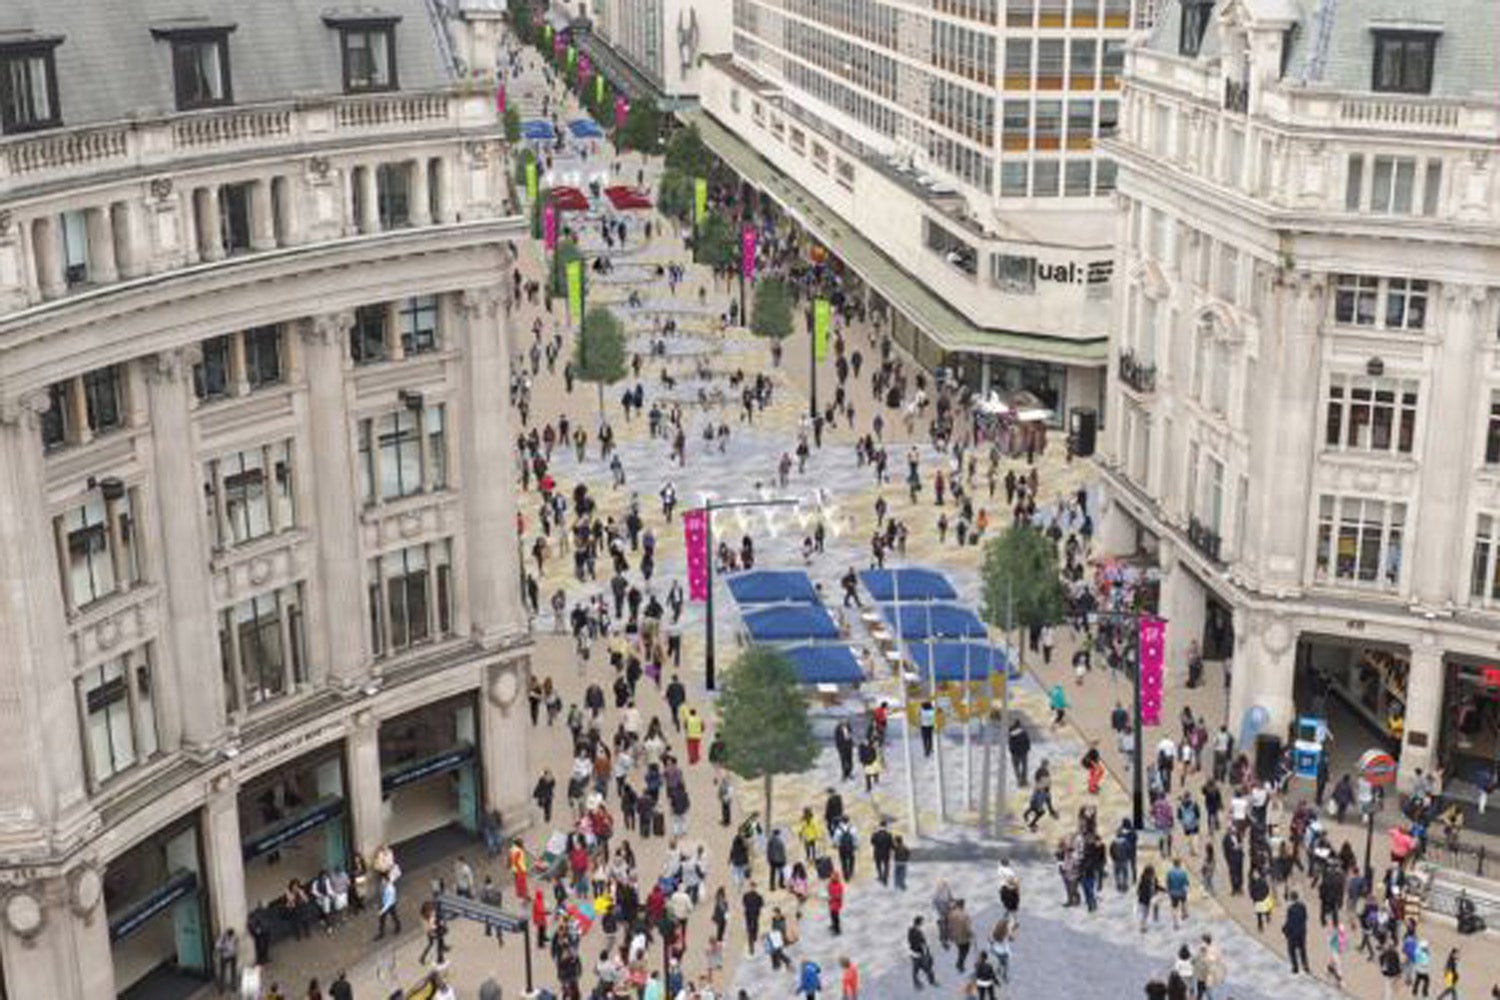 What a pedestrianised Oxford Street could look like